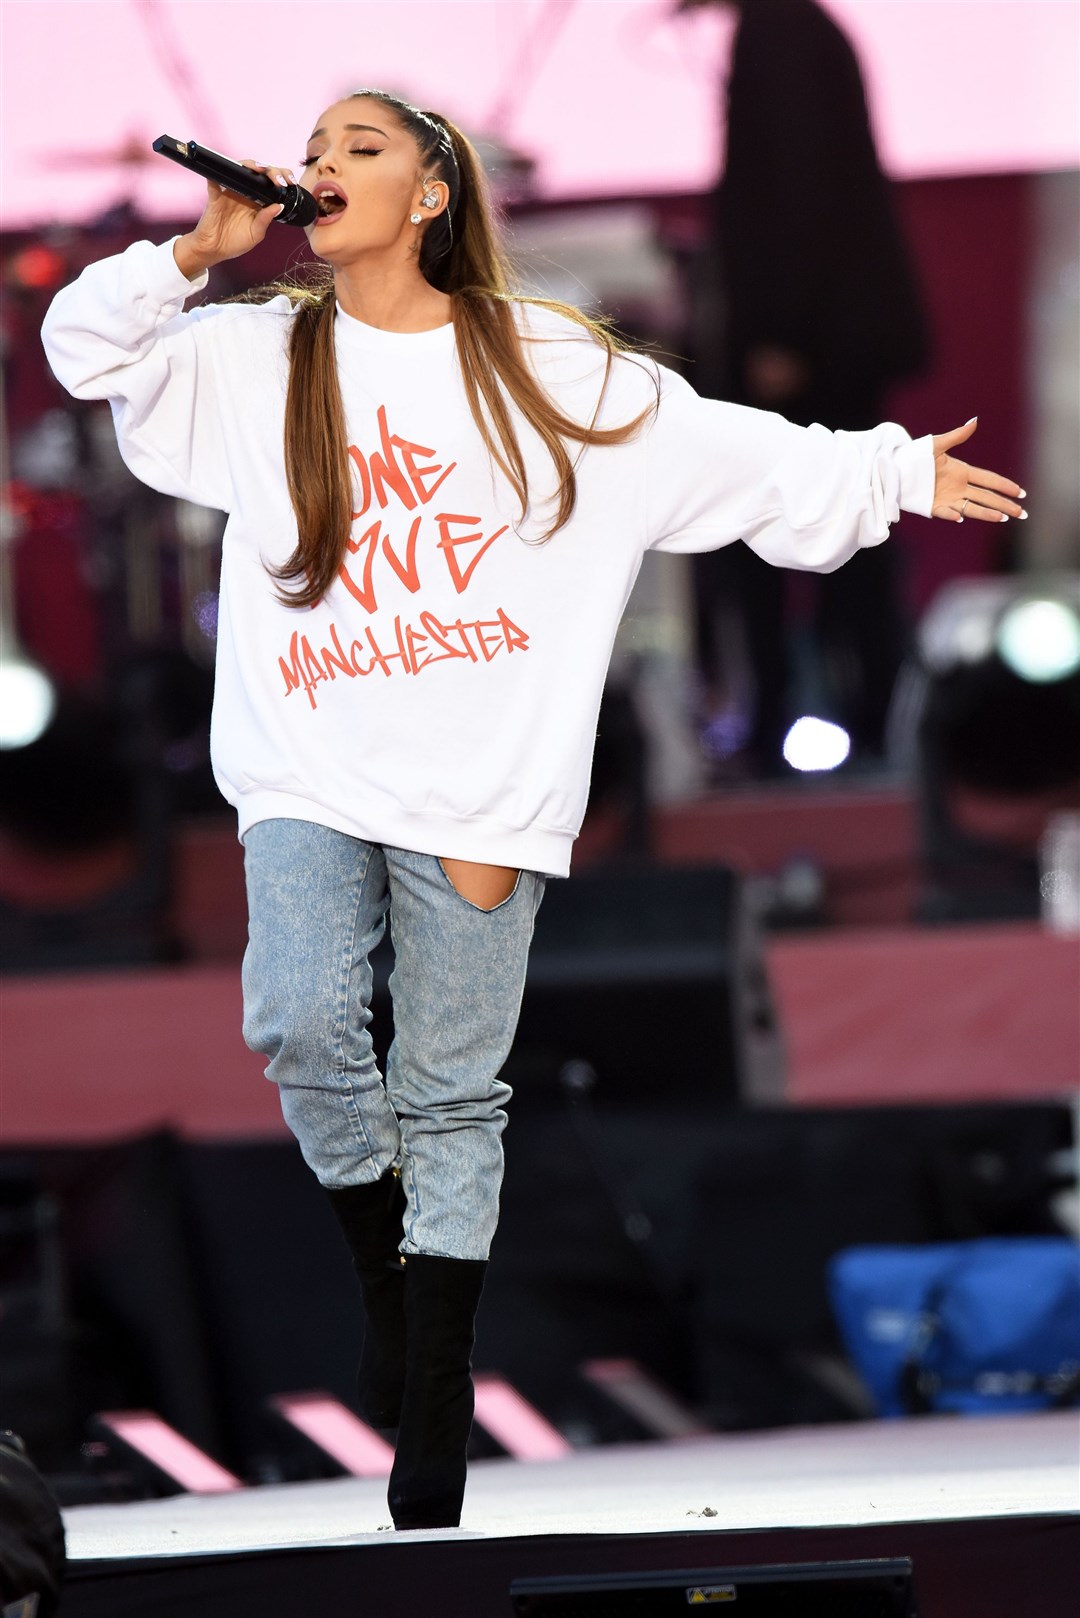 The incident happened after an Ariana Grande concert (Dave Hogan for One Love Manchester)